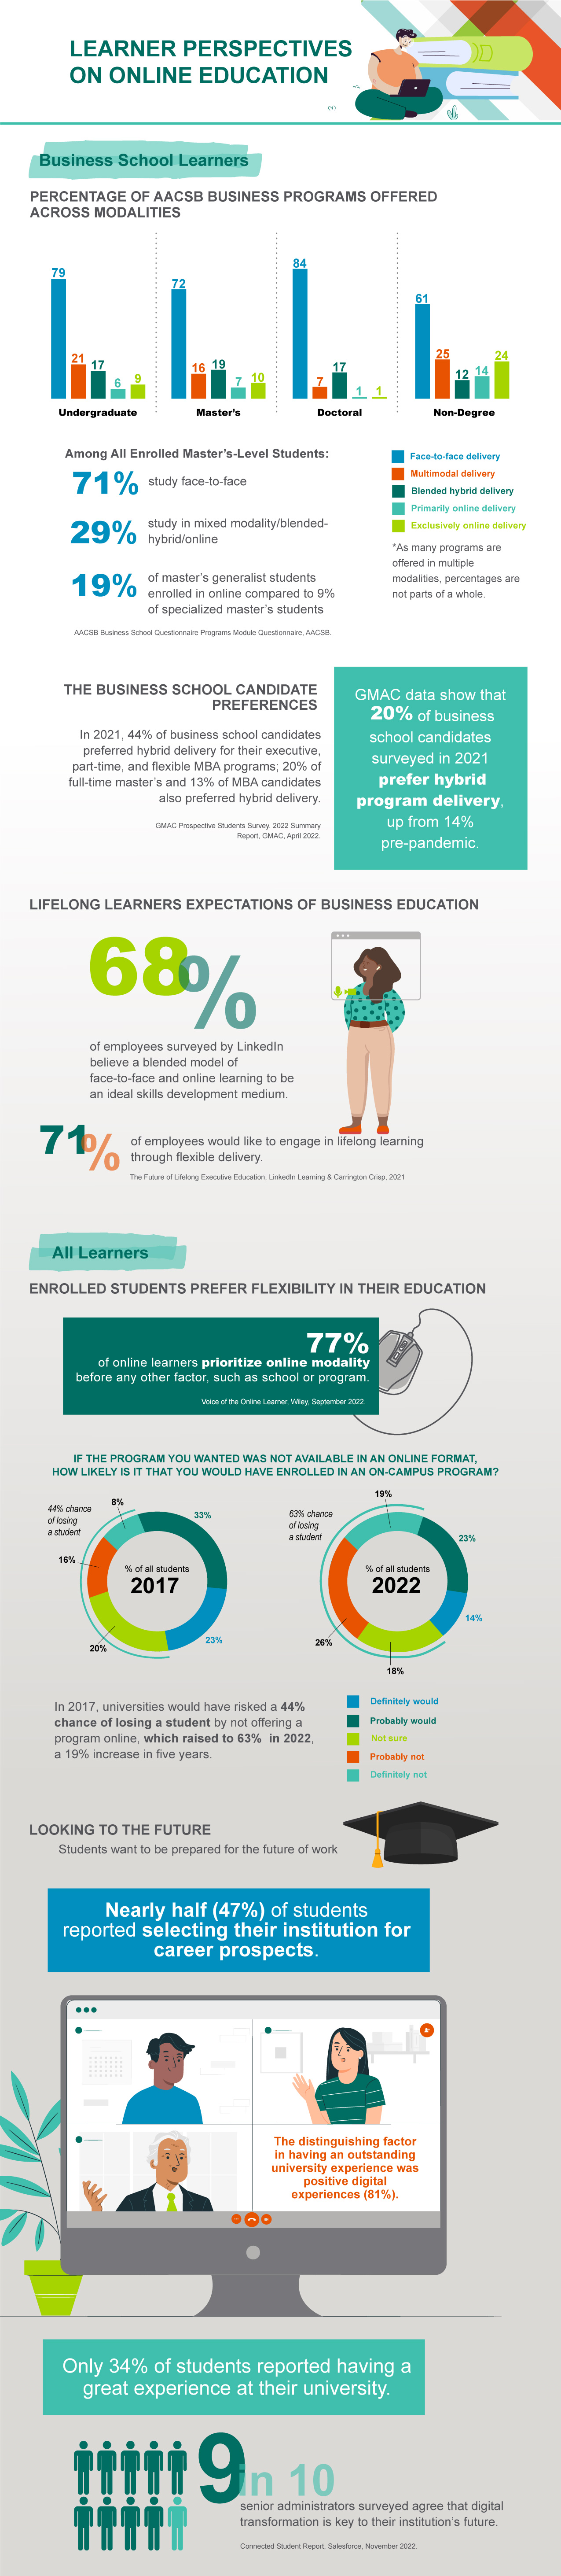 Learner Perspectives on Online Education Infographic